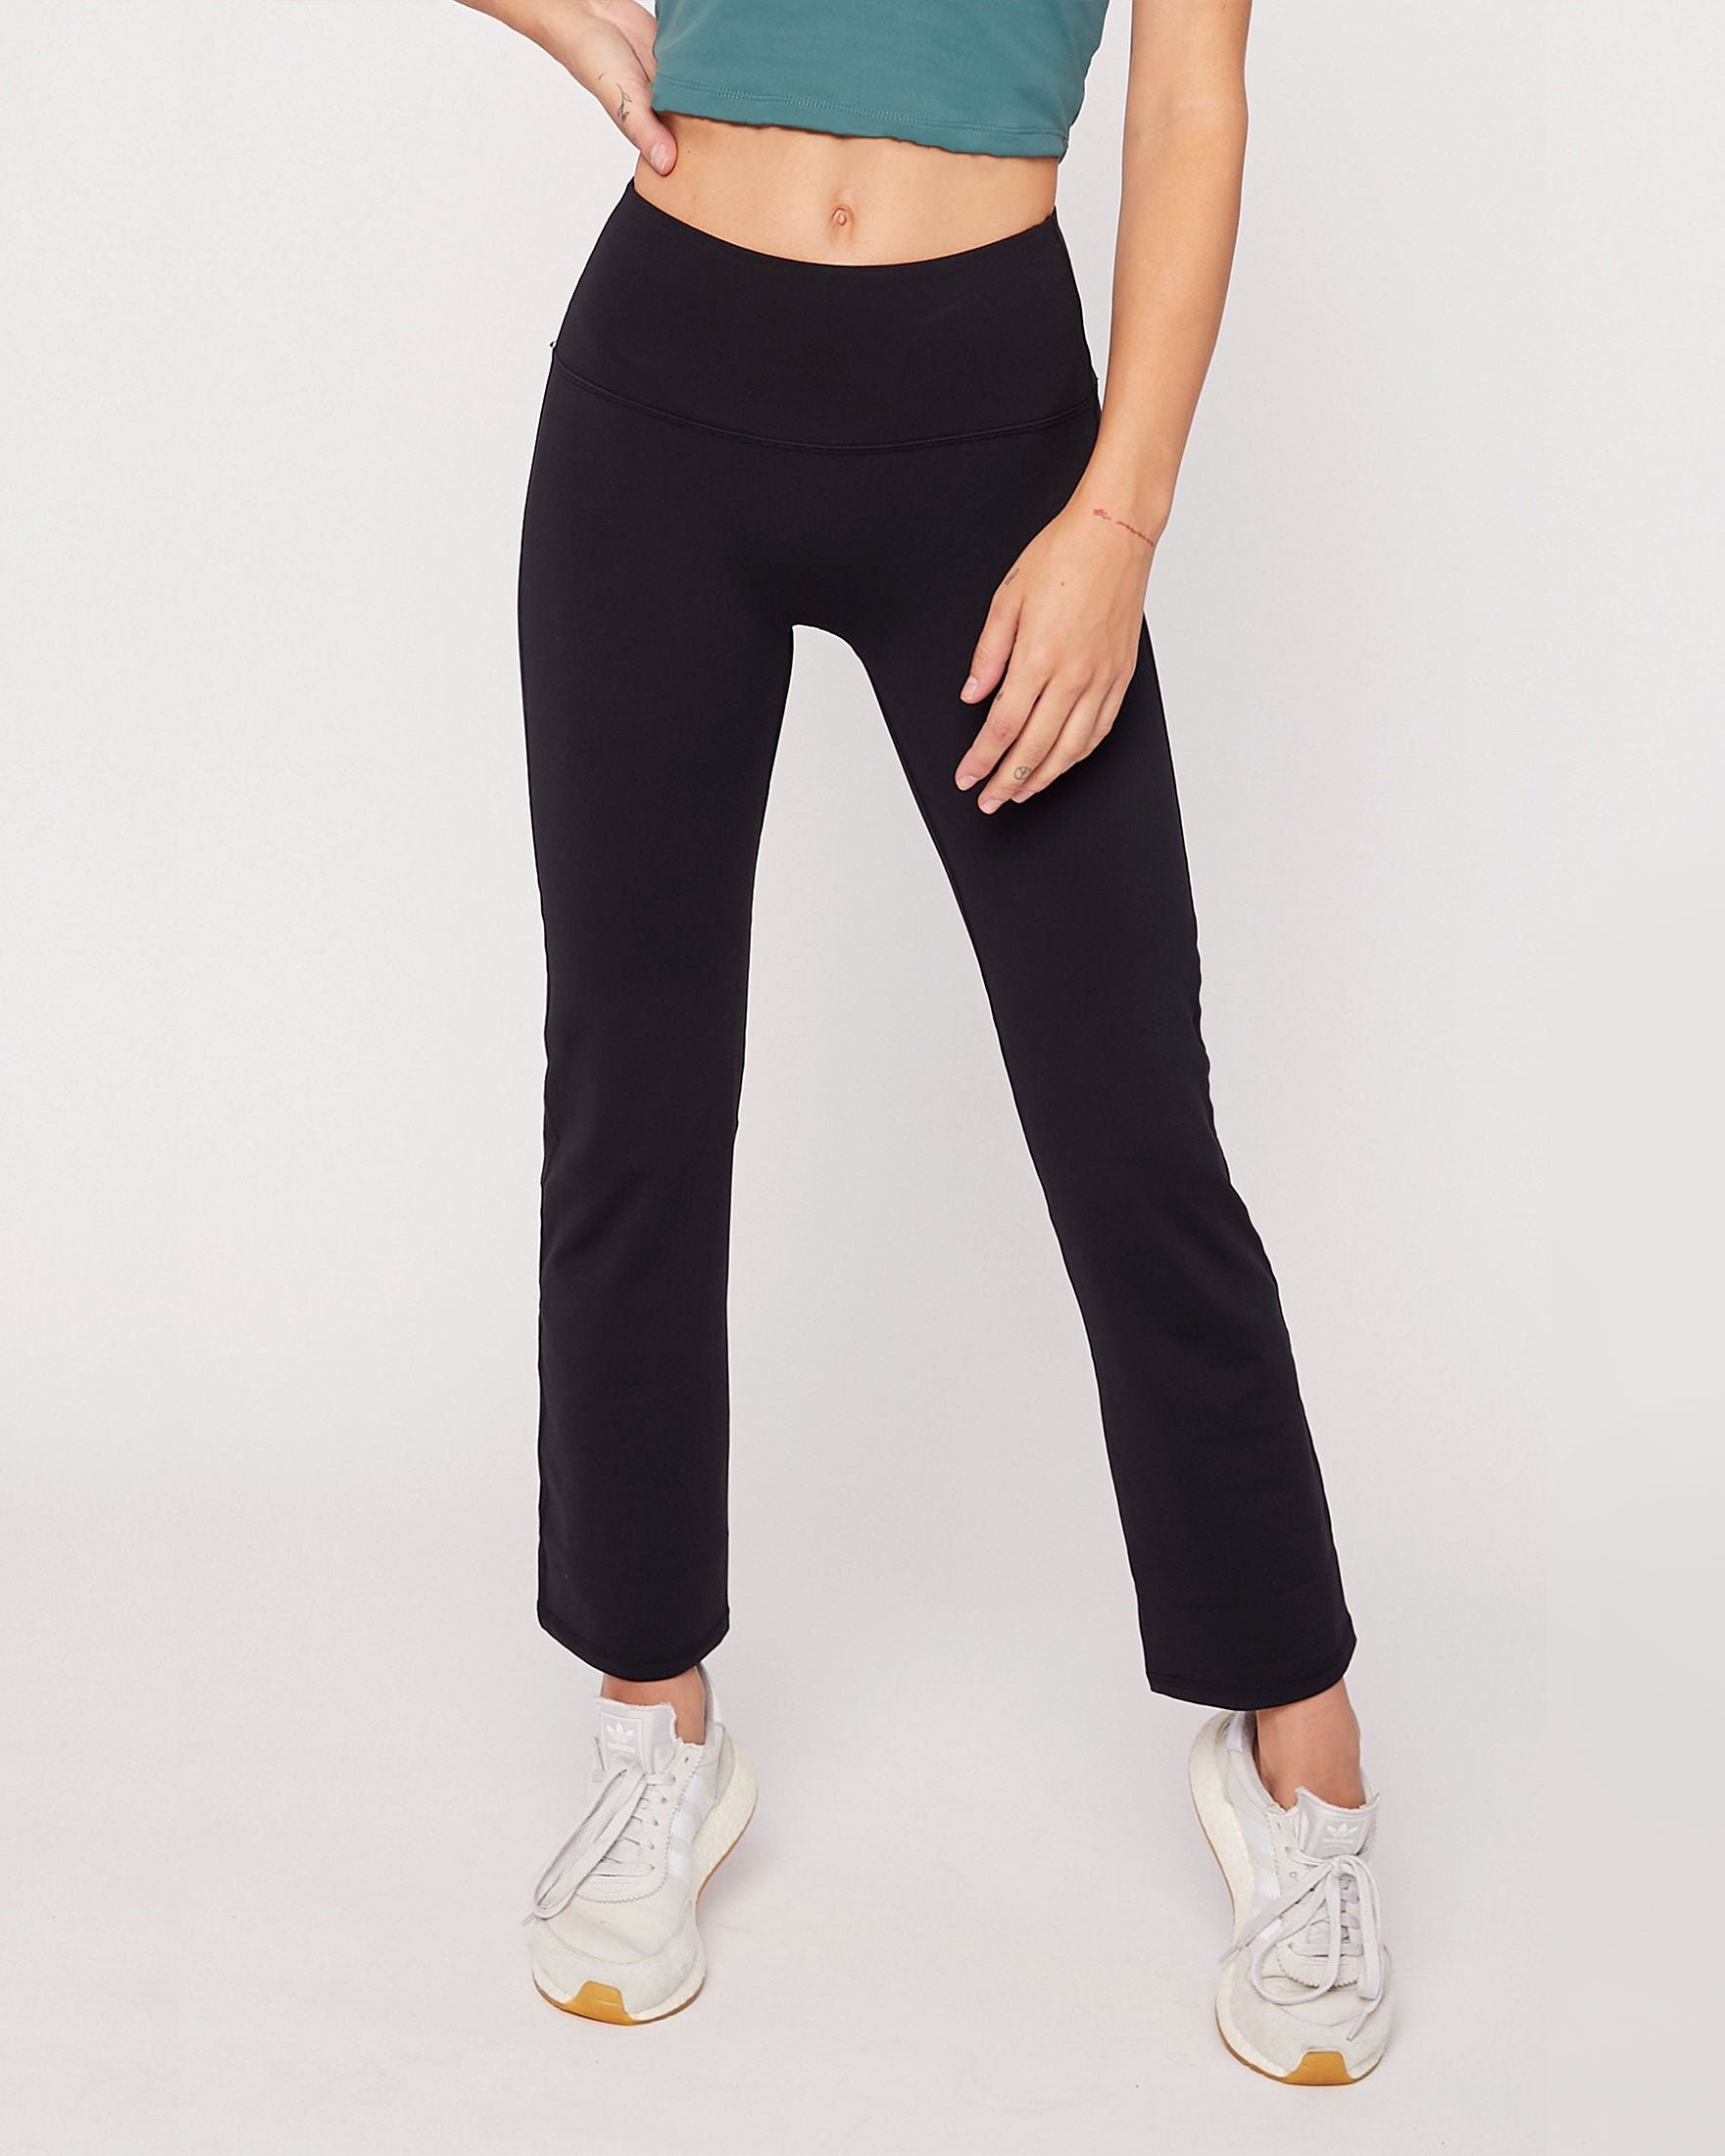 Active Pants Womens Flare Yoga Ribbed Bootcut Leggings High Waisted  Crossover Flares Bottom Workouts With Pockets From Chrosleny, $14.09 |  DHgate.Com